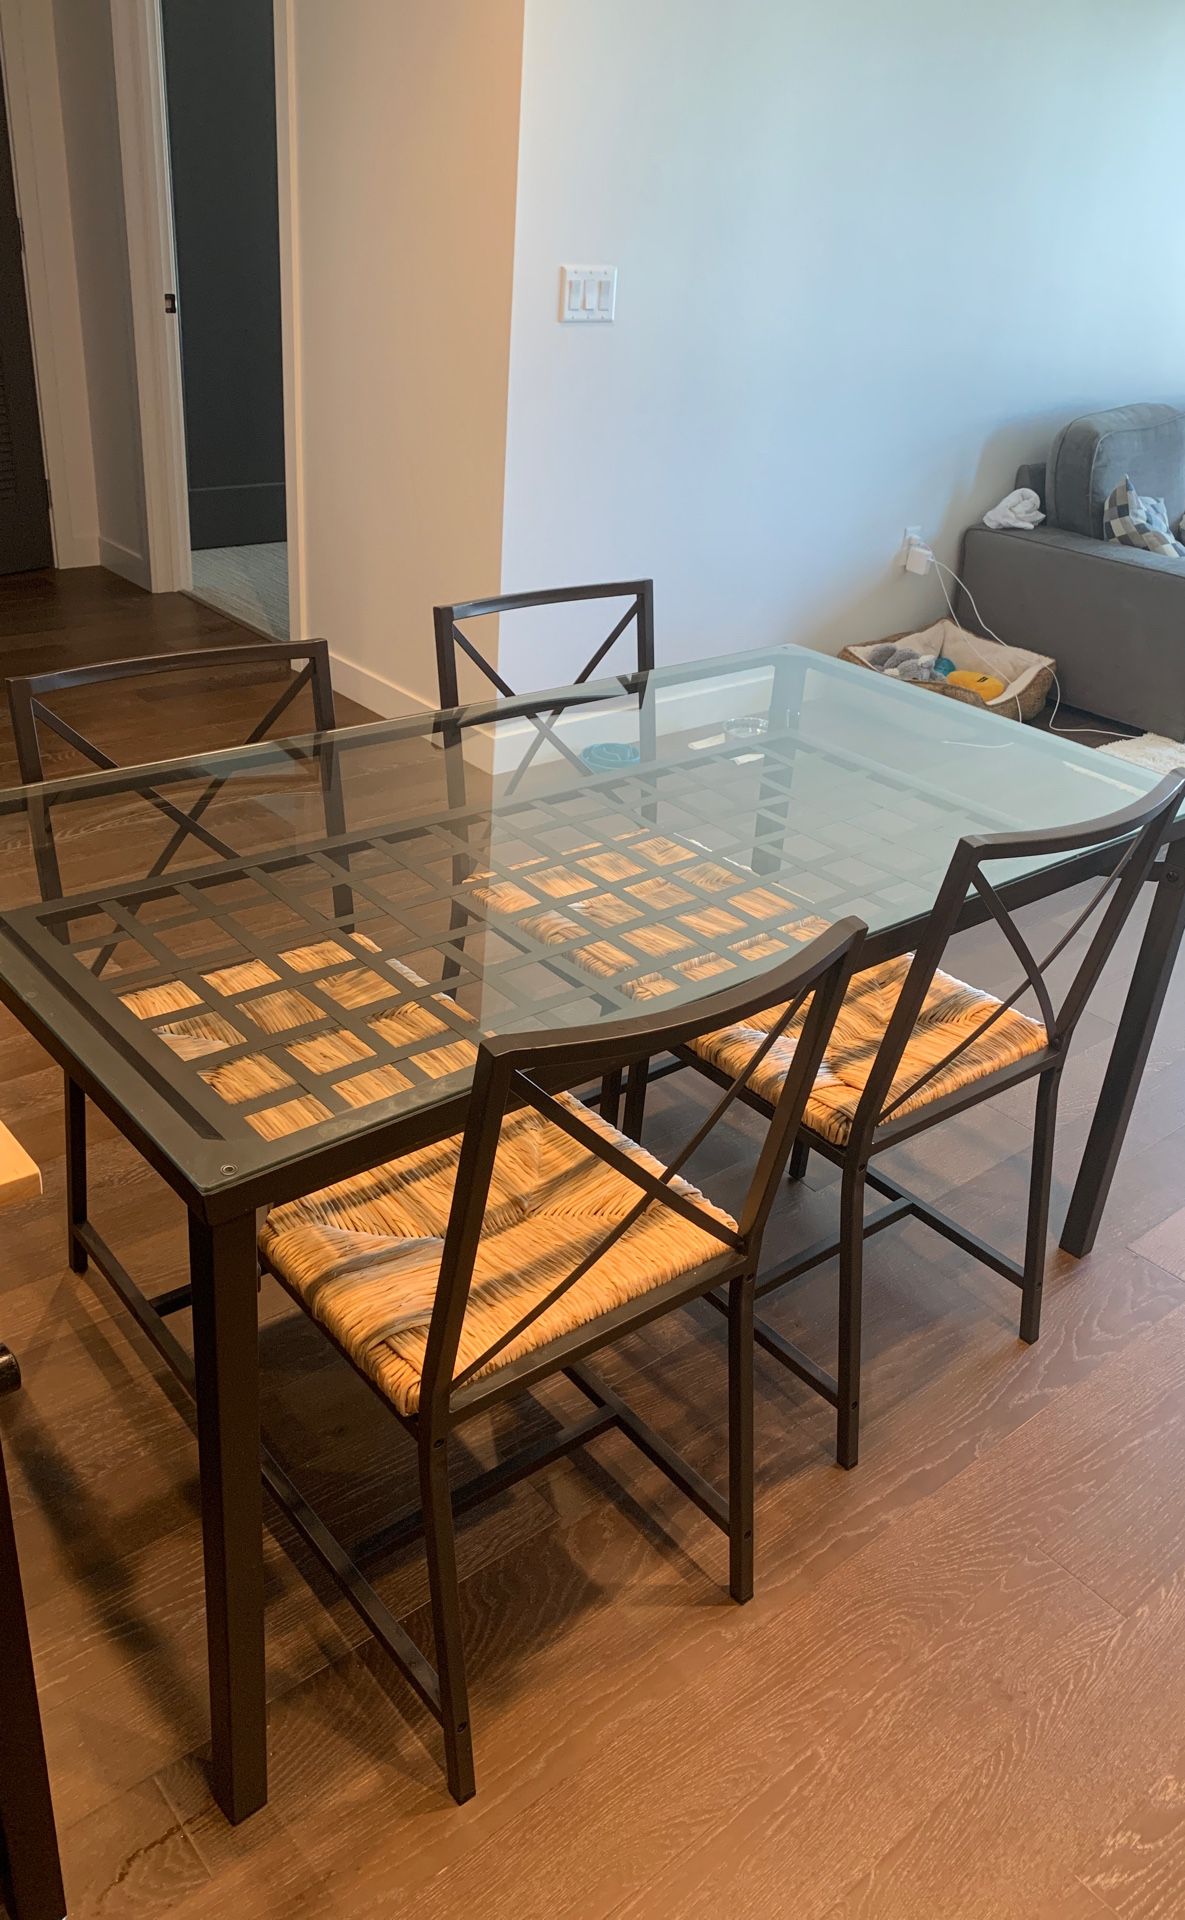 IKEA dining table and chairs set